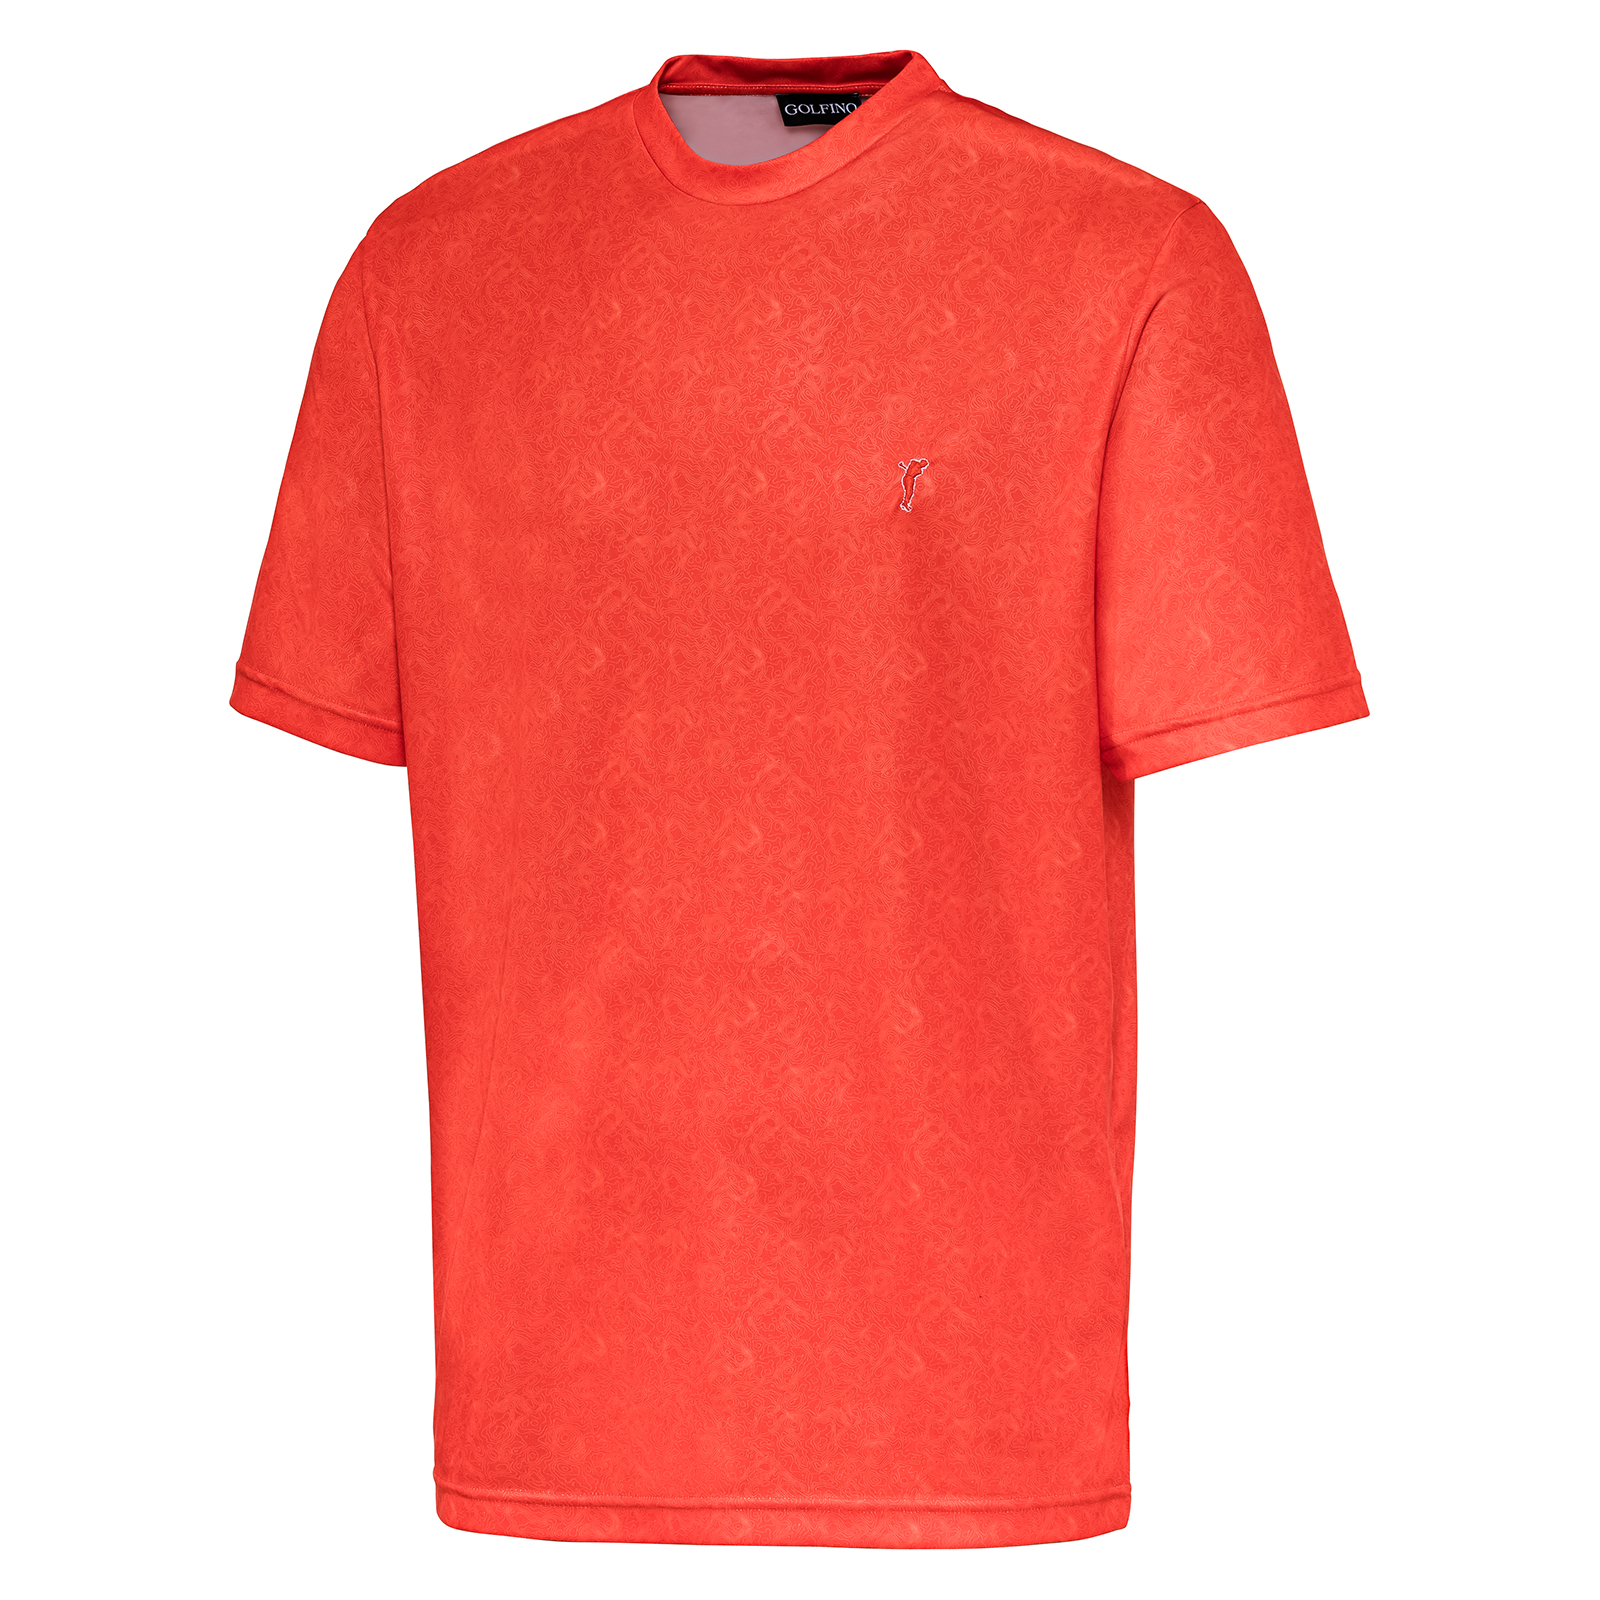 Men's comfortable T-shirt with sun protection and silver protection